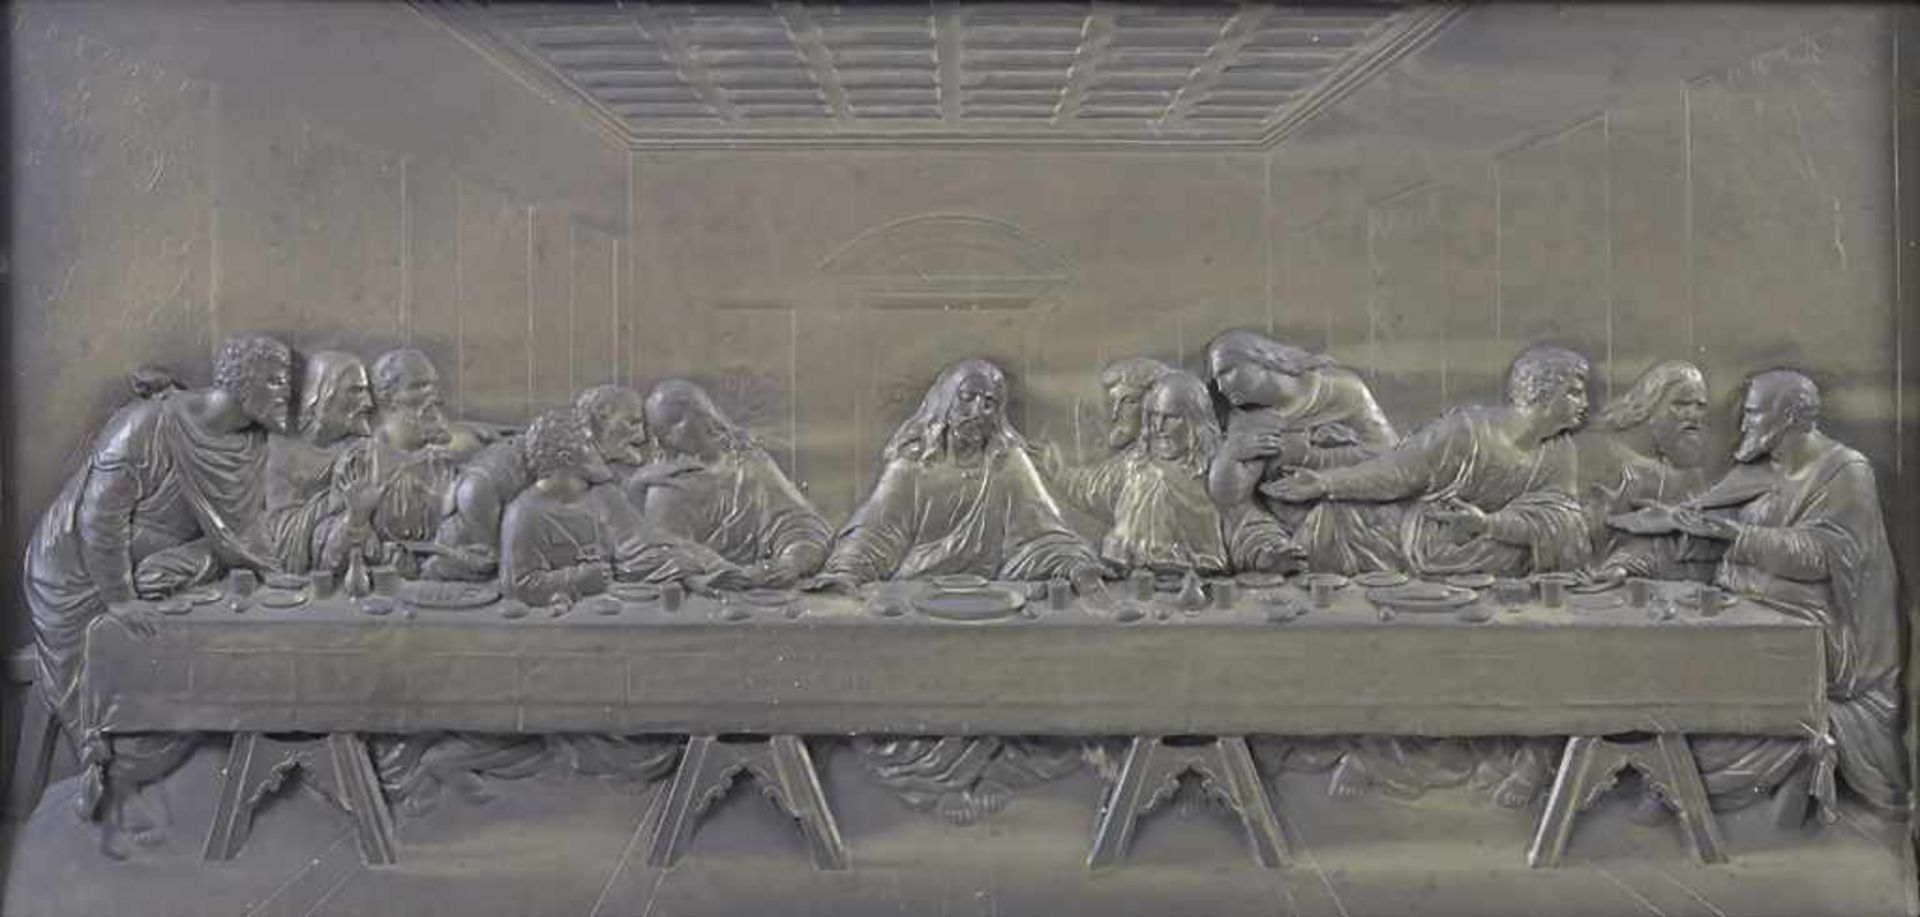 Reliefdarstellung 'Das letzte Abendmahl' / A relief 'The last supper'Material: Messing